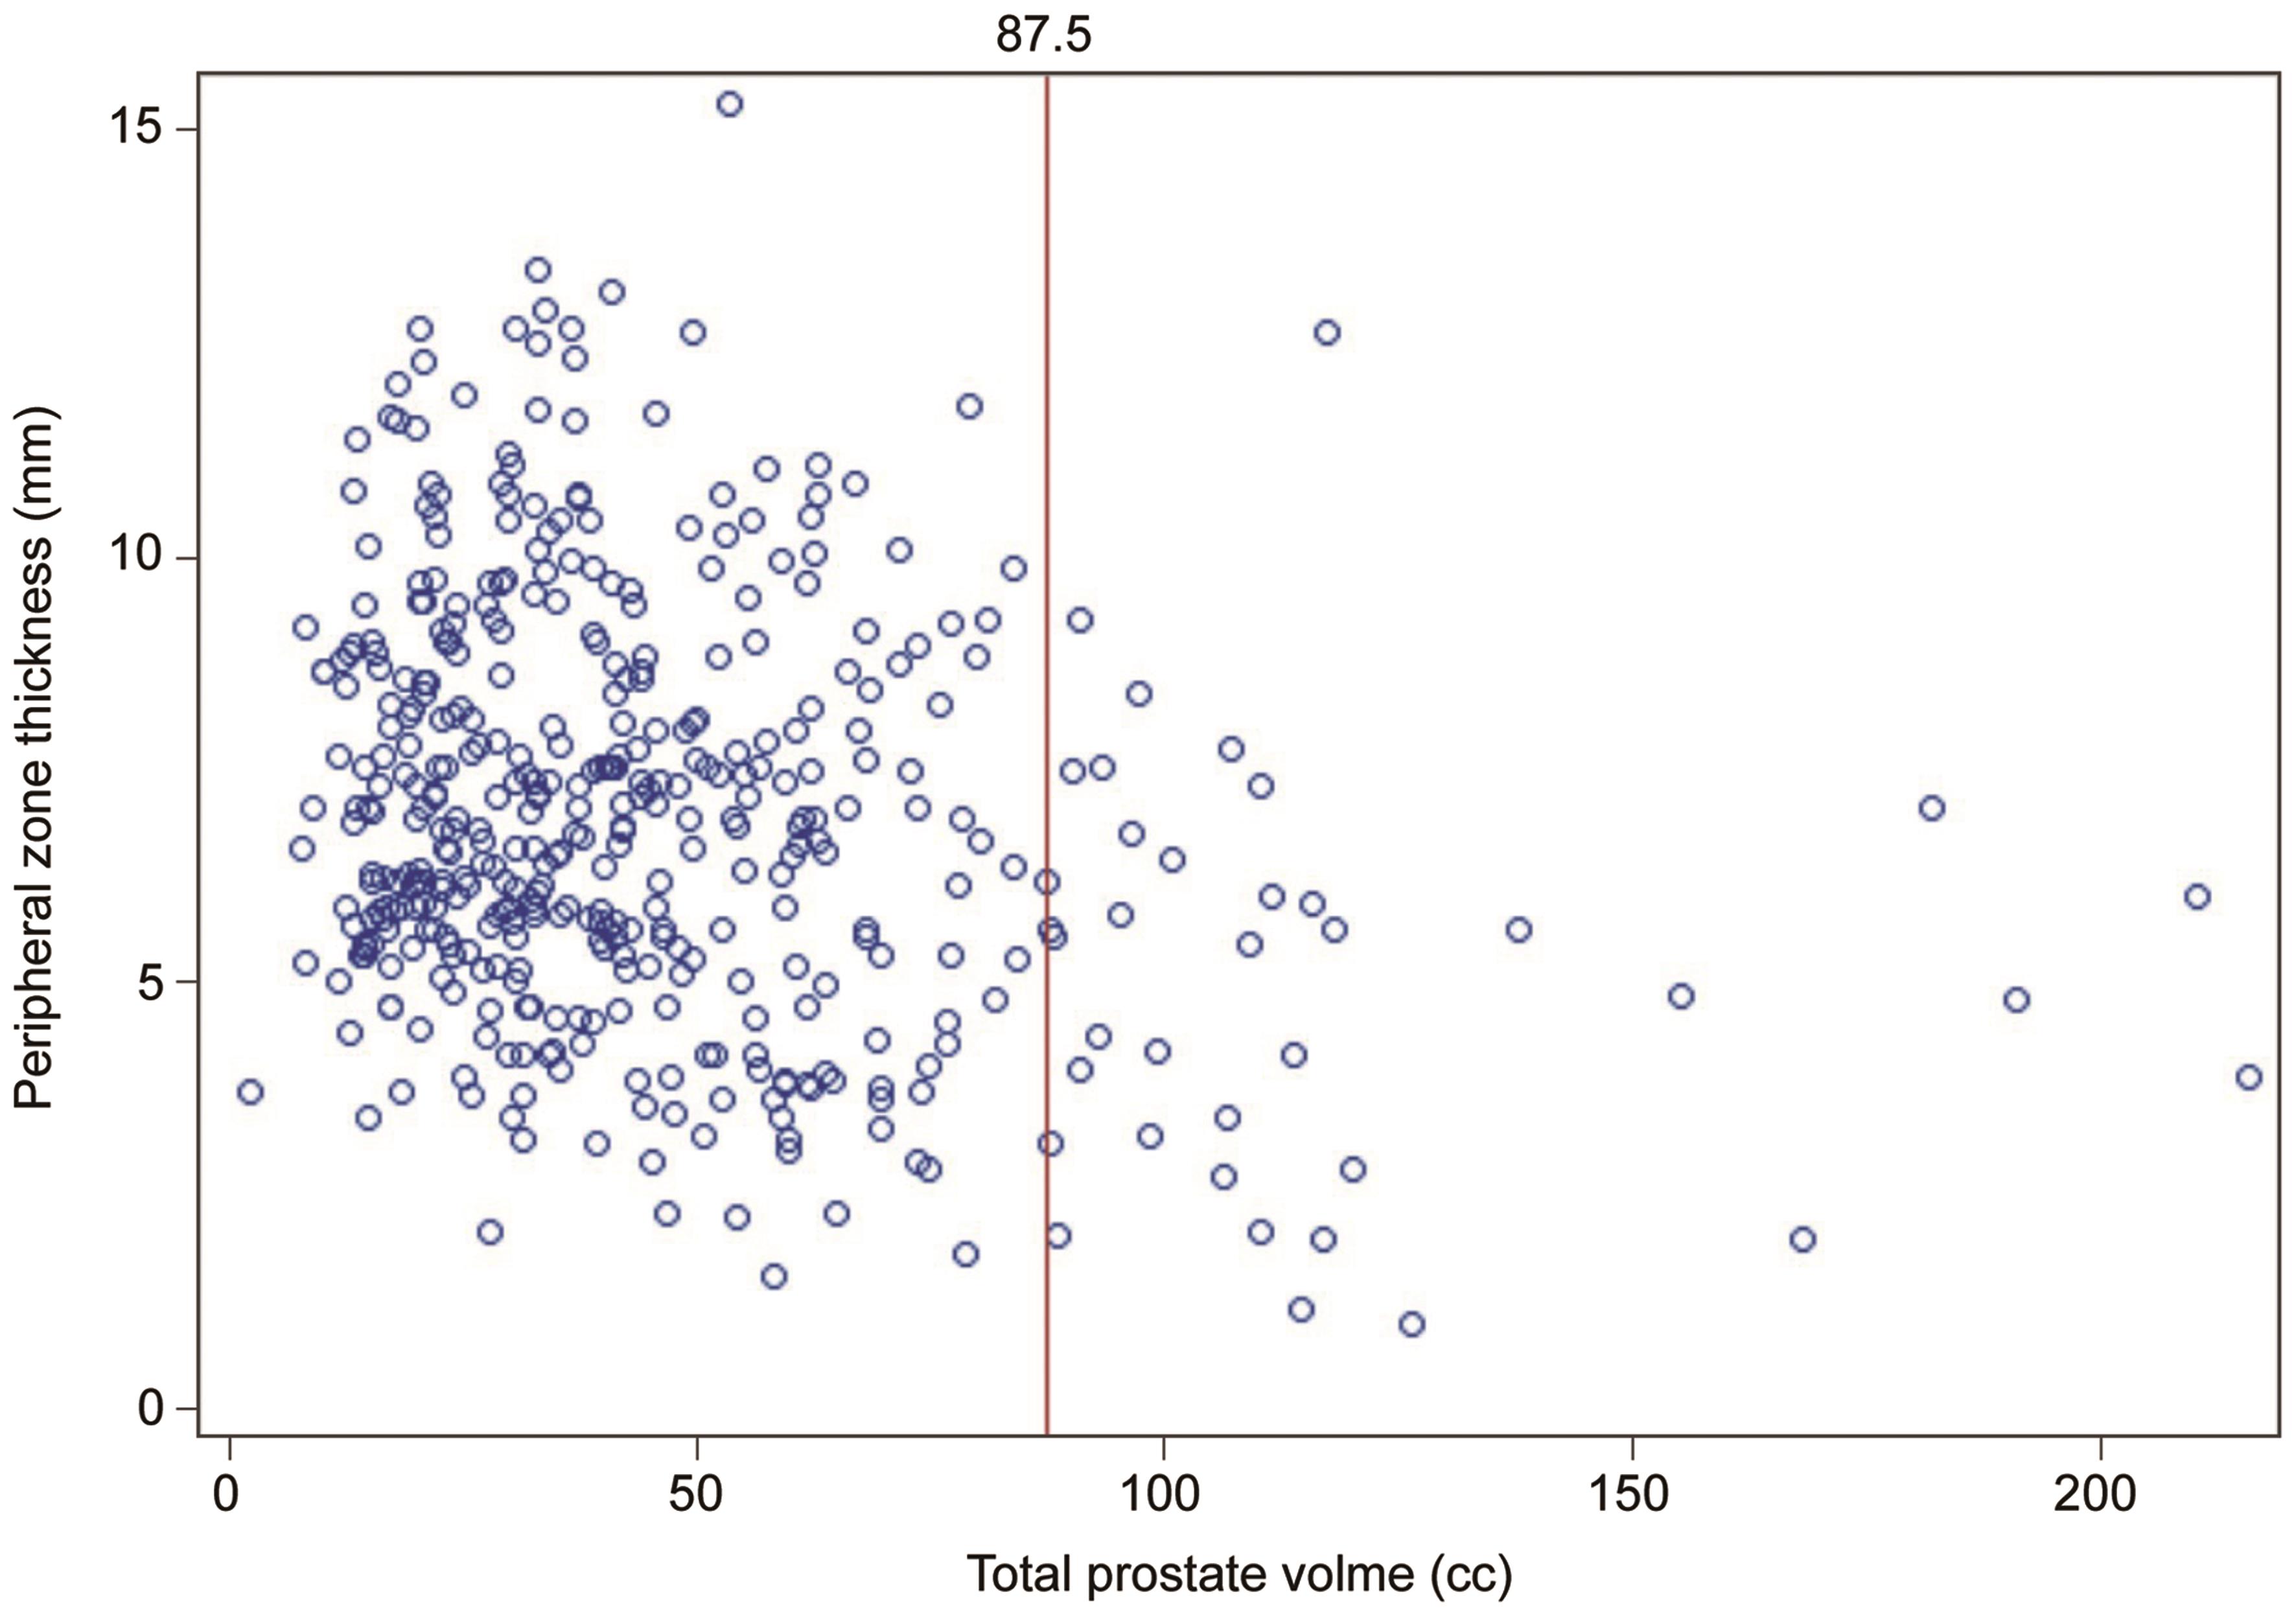 Scatterplot of total prostate volume (cc) and peripheral zone thickness (mm): Patient measurements are represented by blue dots.